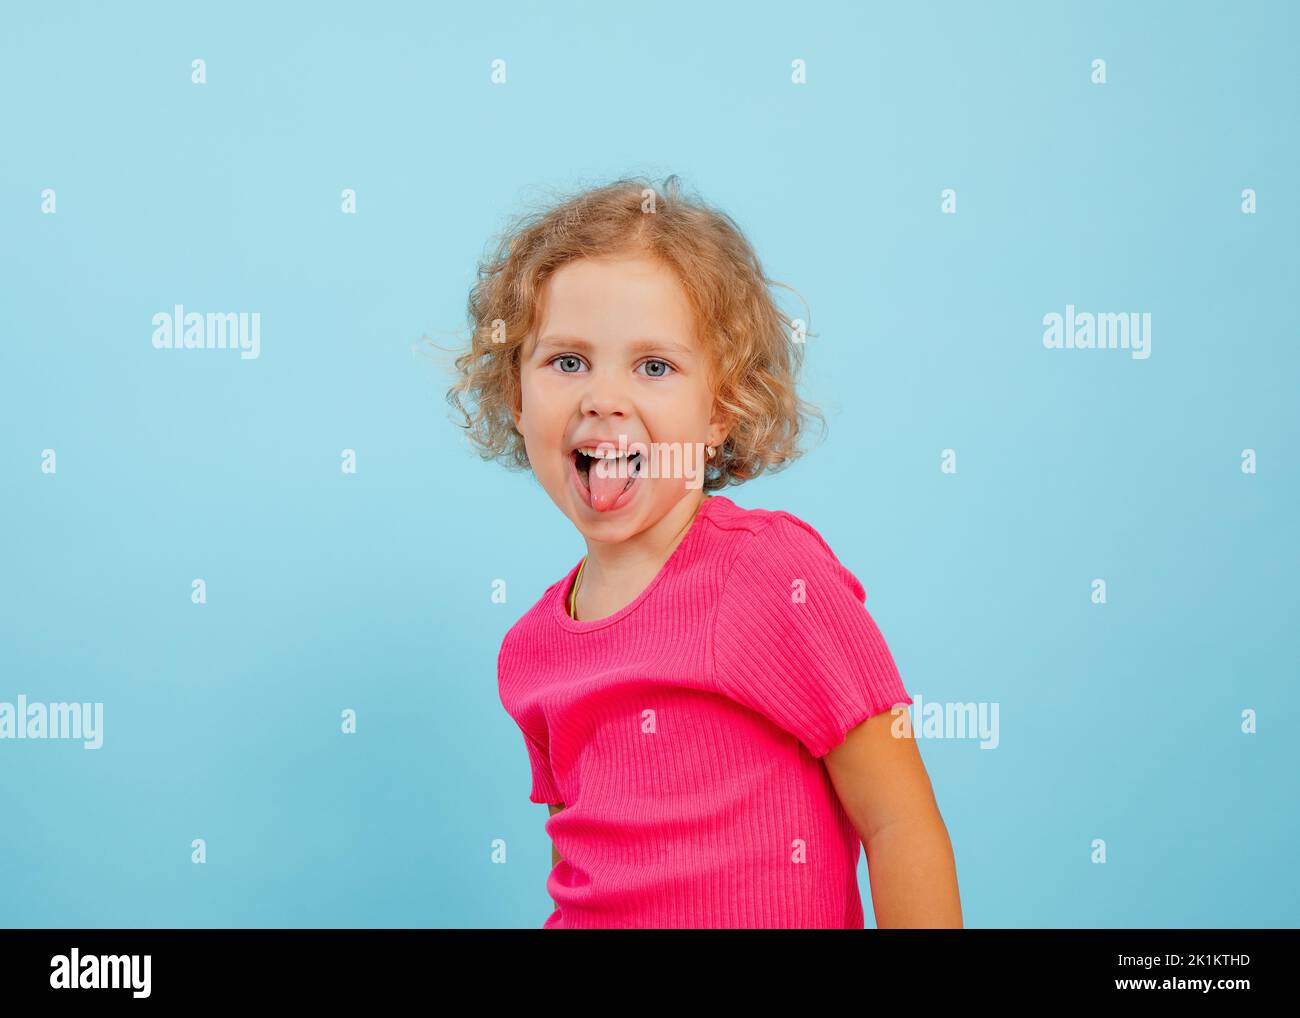 Portrait of happy blue-eyed little girl with curly hair looking, showing tongue, grimacing teasing on blue background. Stock Photo